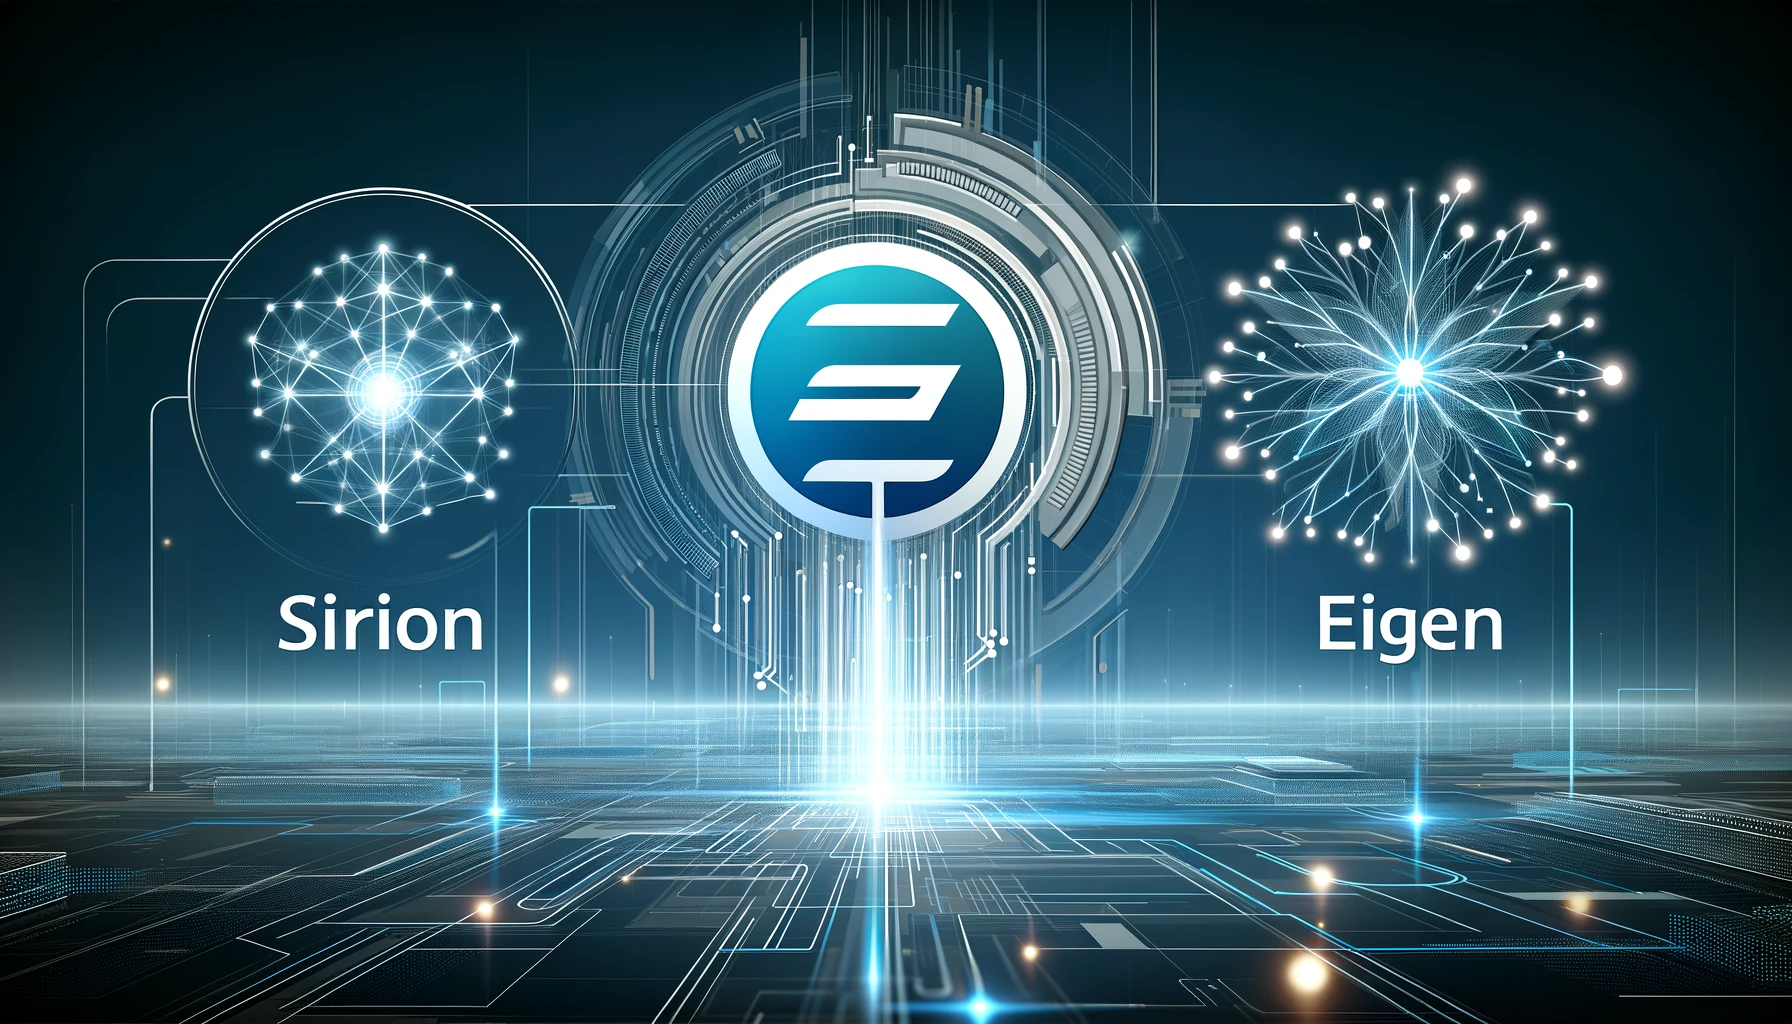 Sirion, Valued at Approximately $1 Billion, Acquires Eigen Amid Consolidation in Enterprise AI Tools Sector